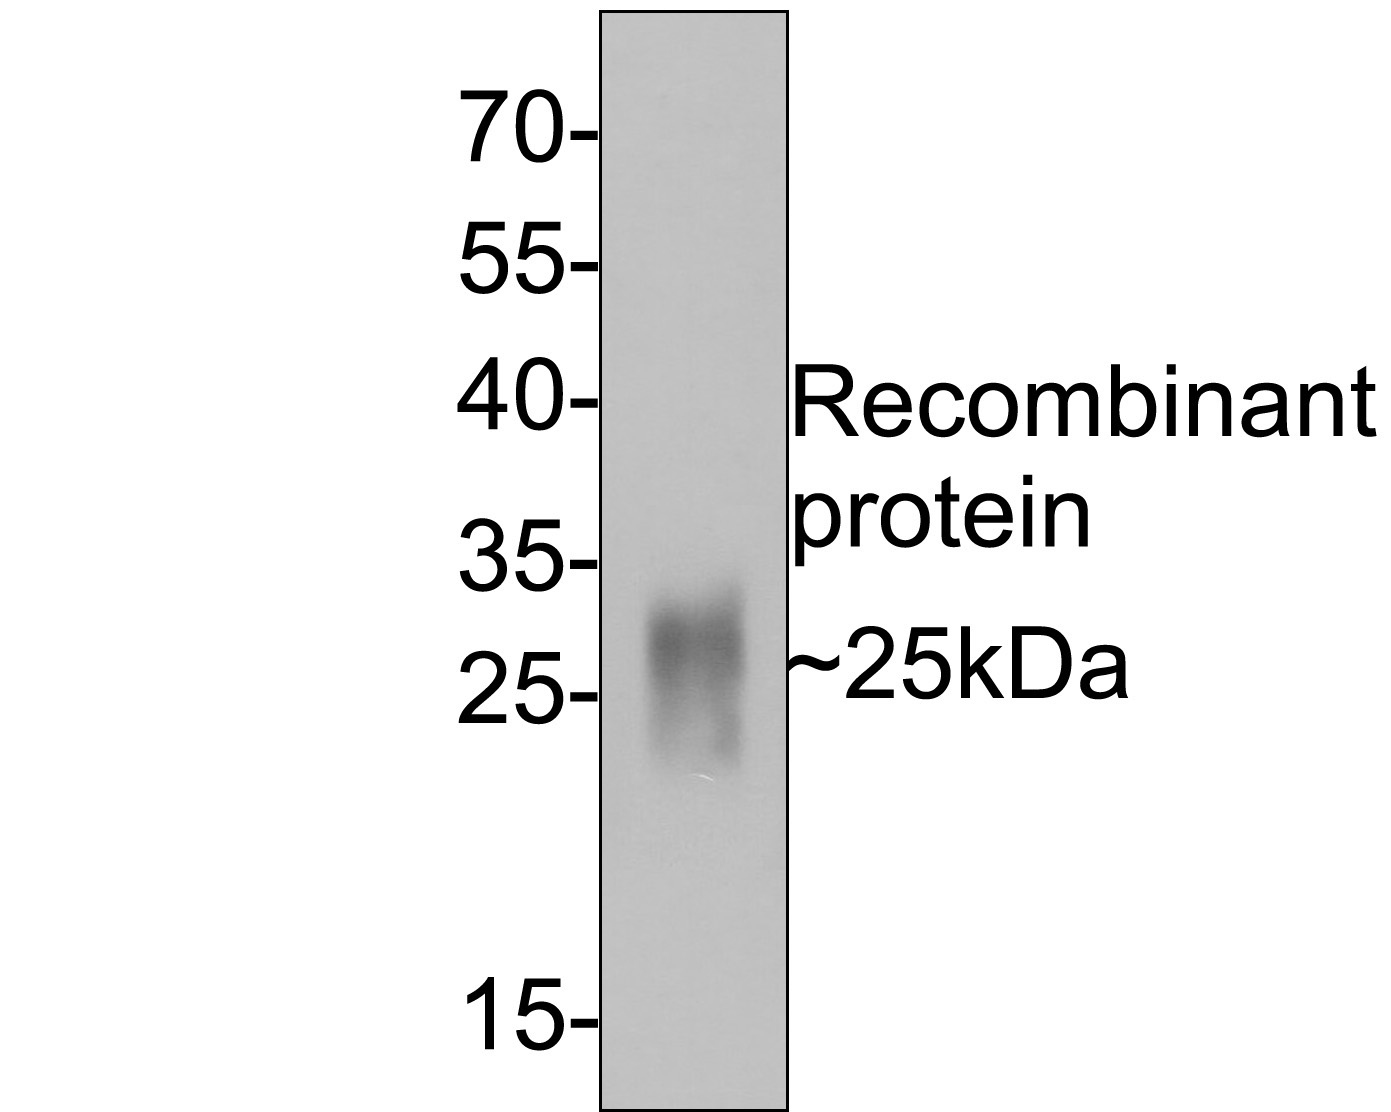 Western blot analysis of GM-CSF on recombinant protein with Mouse anti-GM-CSF antibody (HA601032) at 1/500 dilution.<br />
<br />
Lysates/proteins at 50 ng/Lane.<br />
<br />
Predicted band size: 25 kDa<br />
Observed band size: 25 kDa<br />
<br />
Exposure time: 2 minutes;<br />
<br />
12% SDS-PAGE gel.<br />
<br />
Proteins were transferred to a PVDF membrane and blocked with 5% NFDM/TBST for 1 hour at room temperature. The primary antibody (HA601032) at 1/500 dilution was used in 5% NFDM/TBST at room temperature for 2 hours. Goat Anti-Mouse IgG - HRP Secondary Antibody (HA1006) at 1:100,000 dilution was used for 1 hour at room temperature.